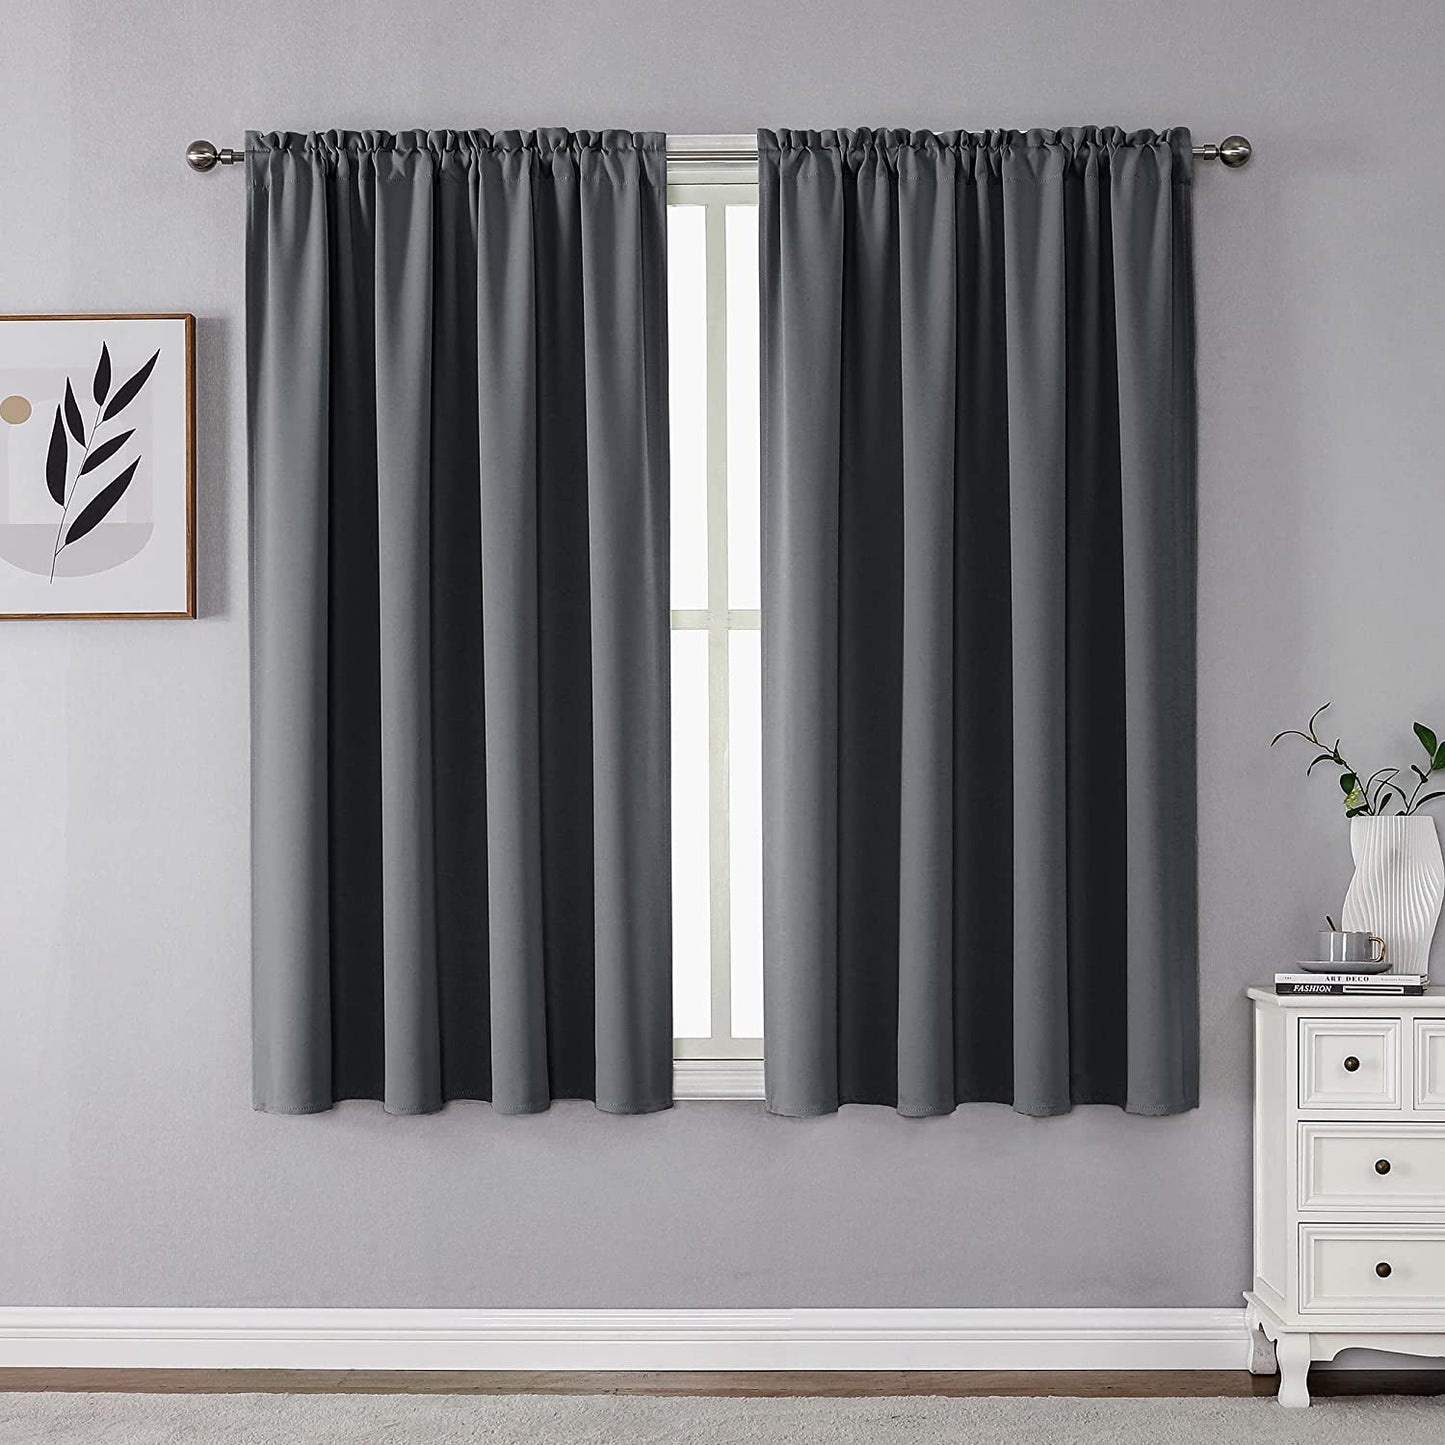 CUCRAF Blackout Curtains 84 Inches Long for Living Room, Light Beige Room Darkening Window Curtain Panels, Rod Pocket Thermal Insulated Solid Drapes for Bedroom, 52X84 Inch, Set of 2 Panels  CUCRAF Dark Grey 52W X 54L Inch 2 Panels 